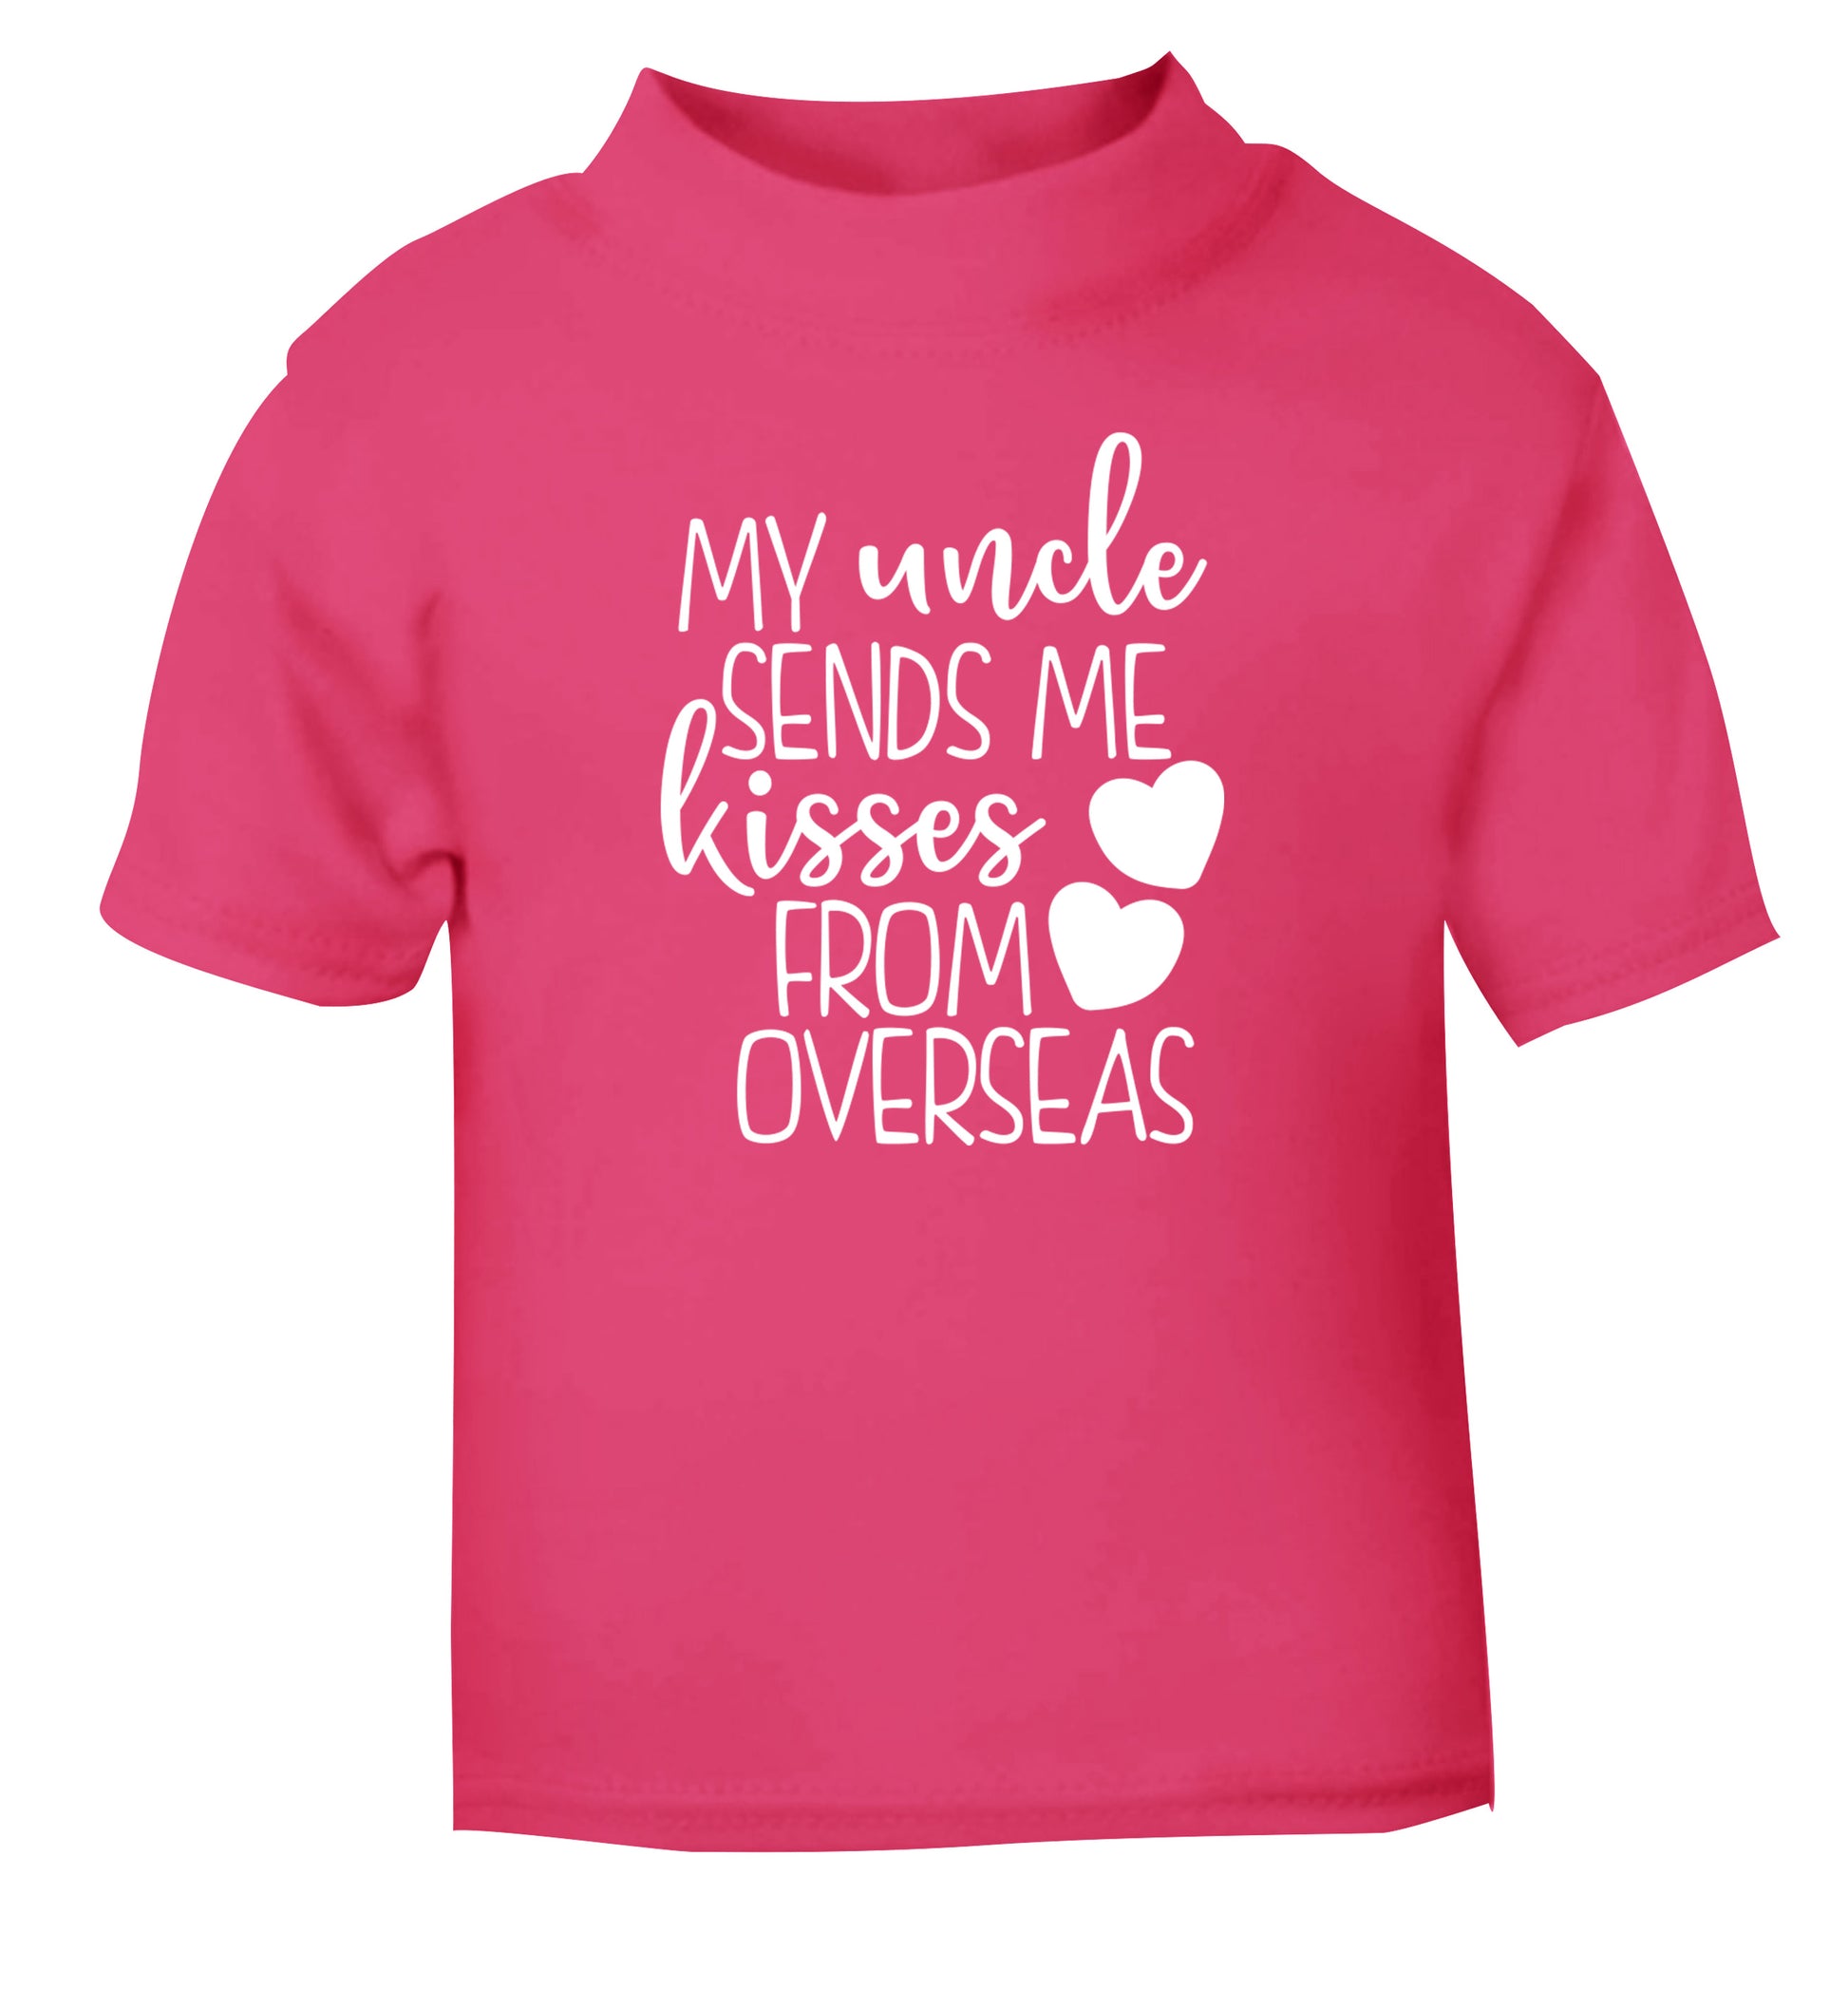 My uncle sends me kisses from overseas pink Baby Toddler Tshirt 2 Years